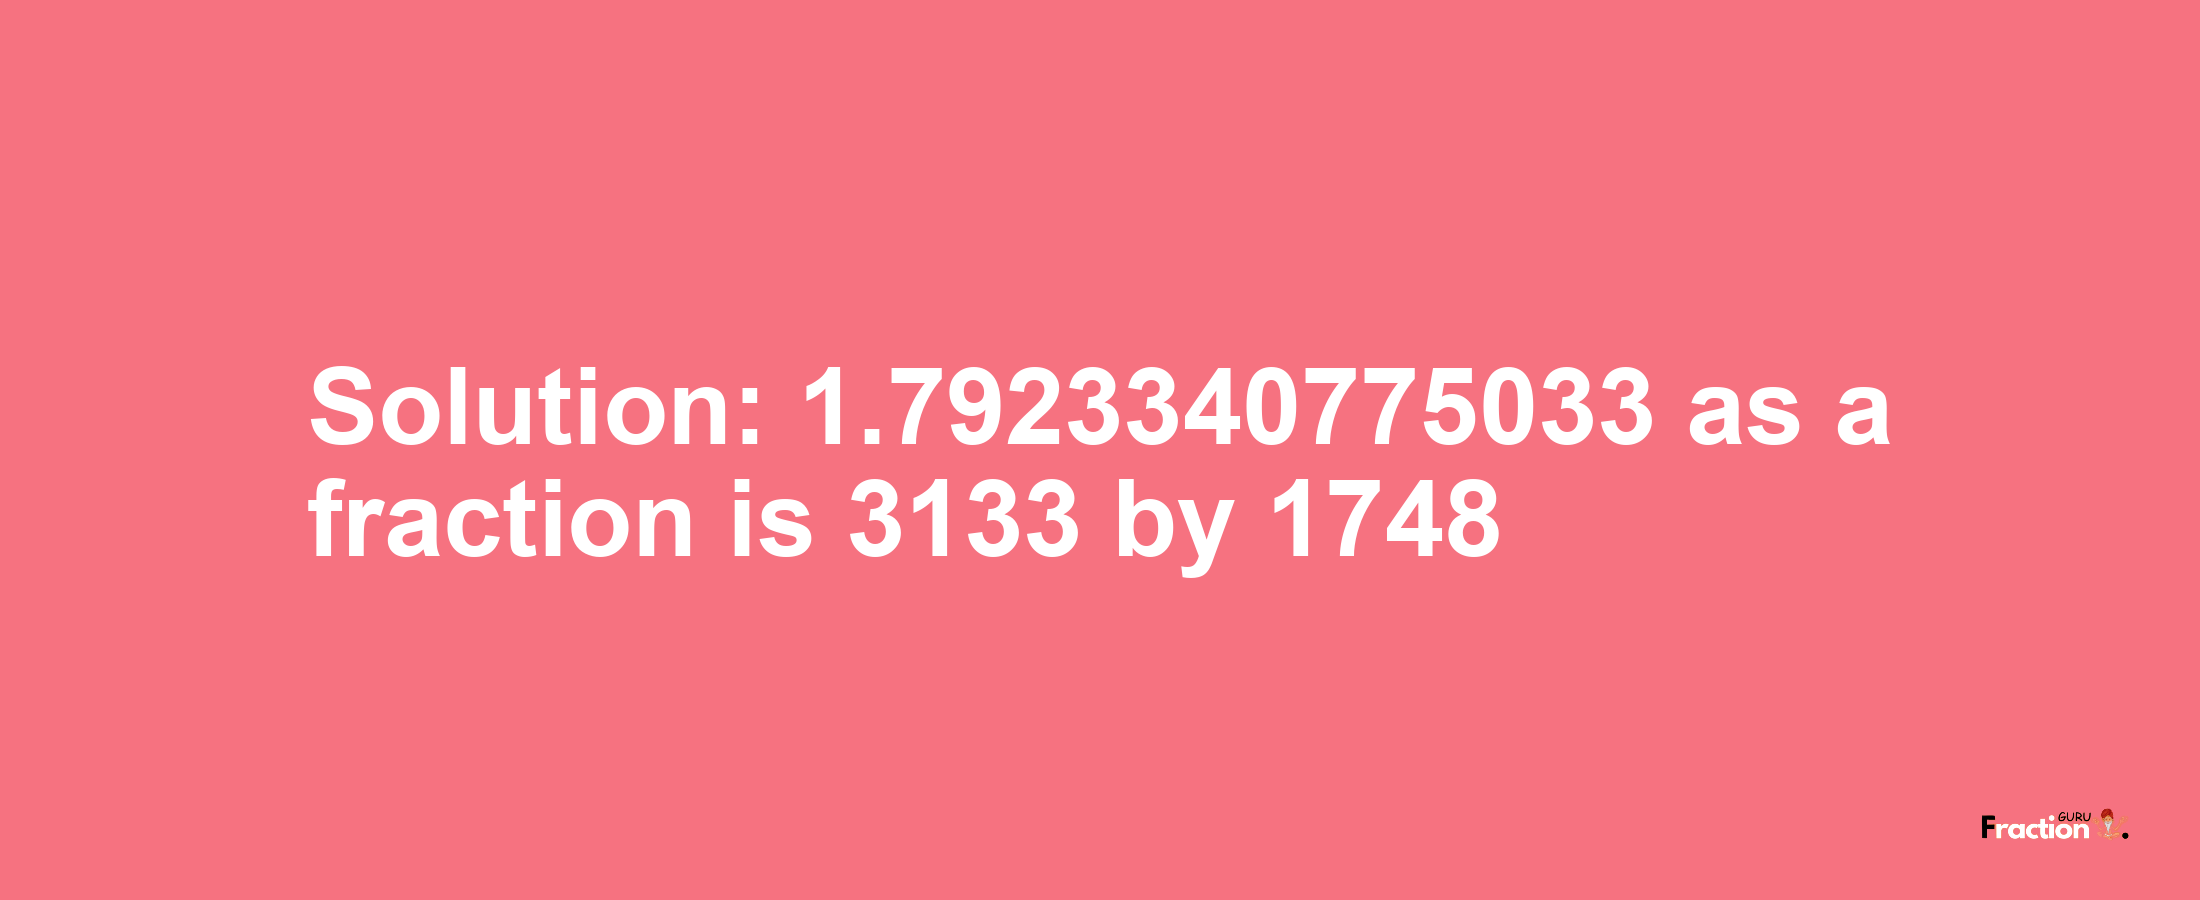 Solution:1.7923340775033 as a fraction is 3133/1748